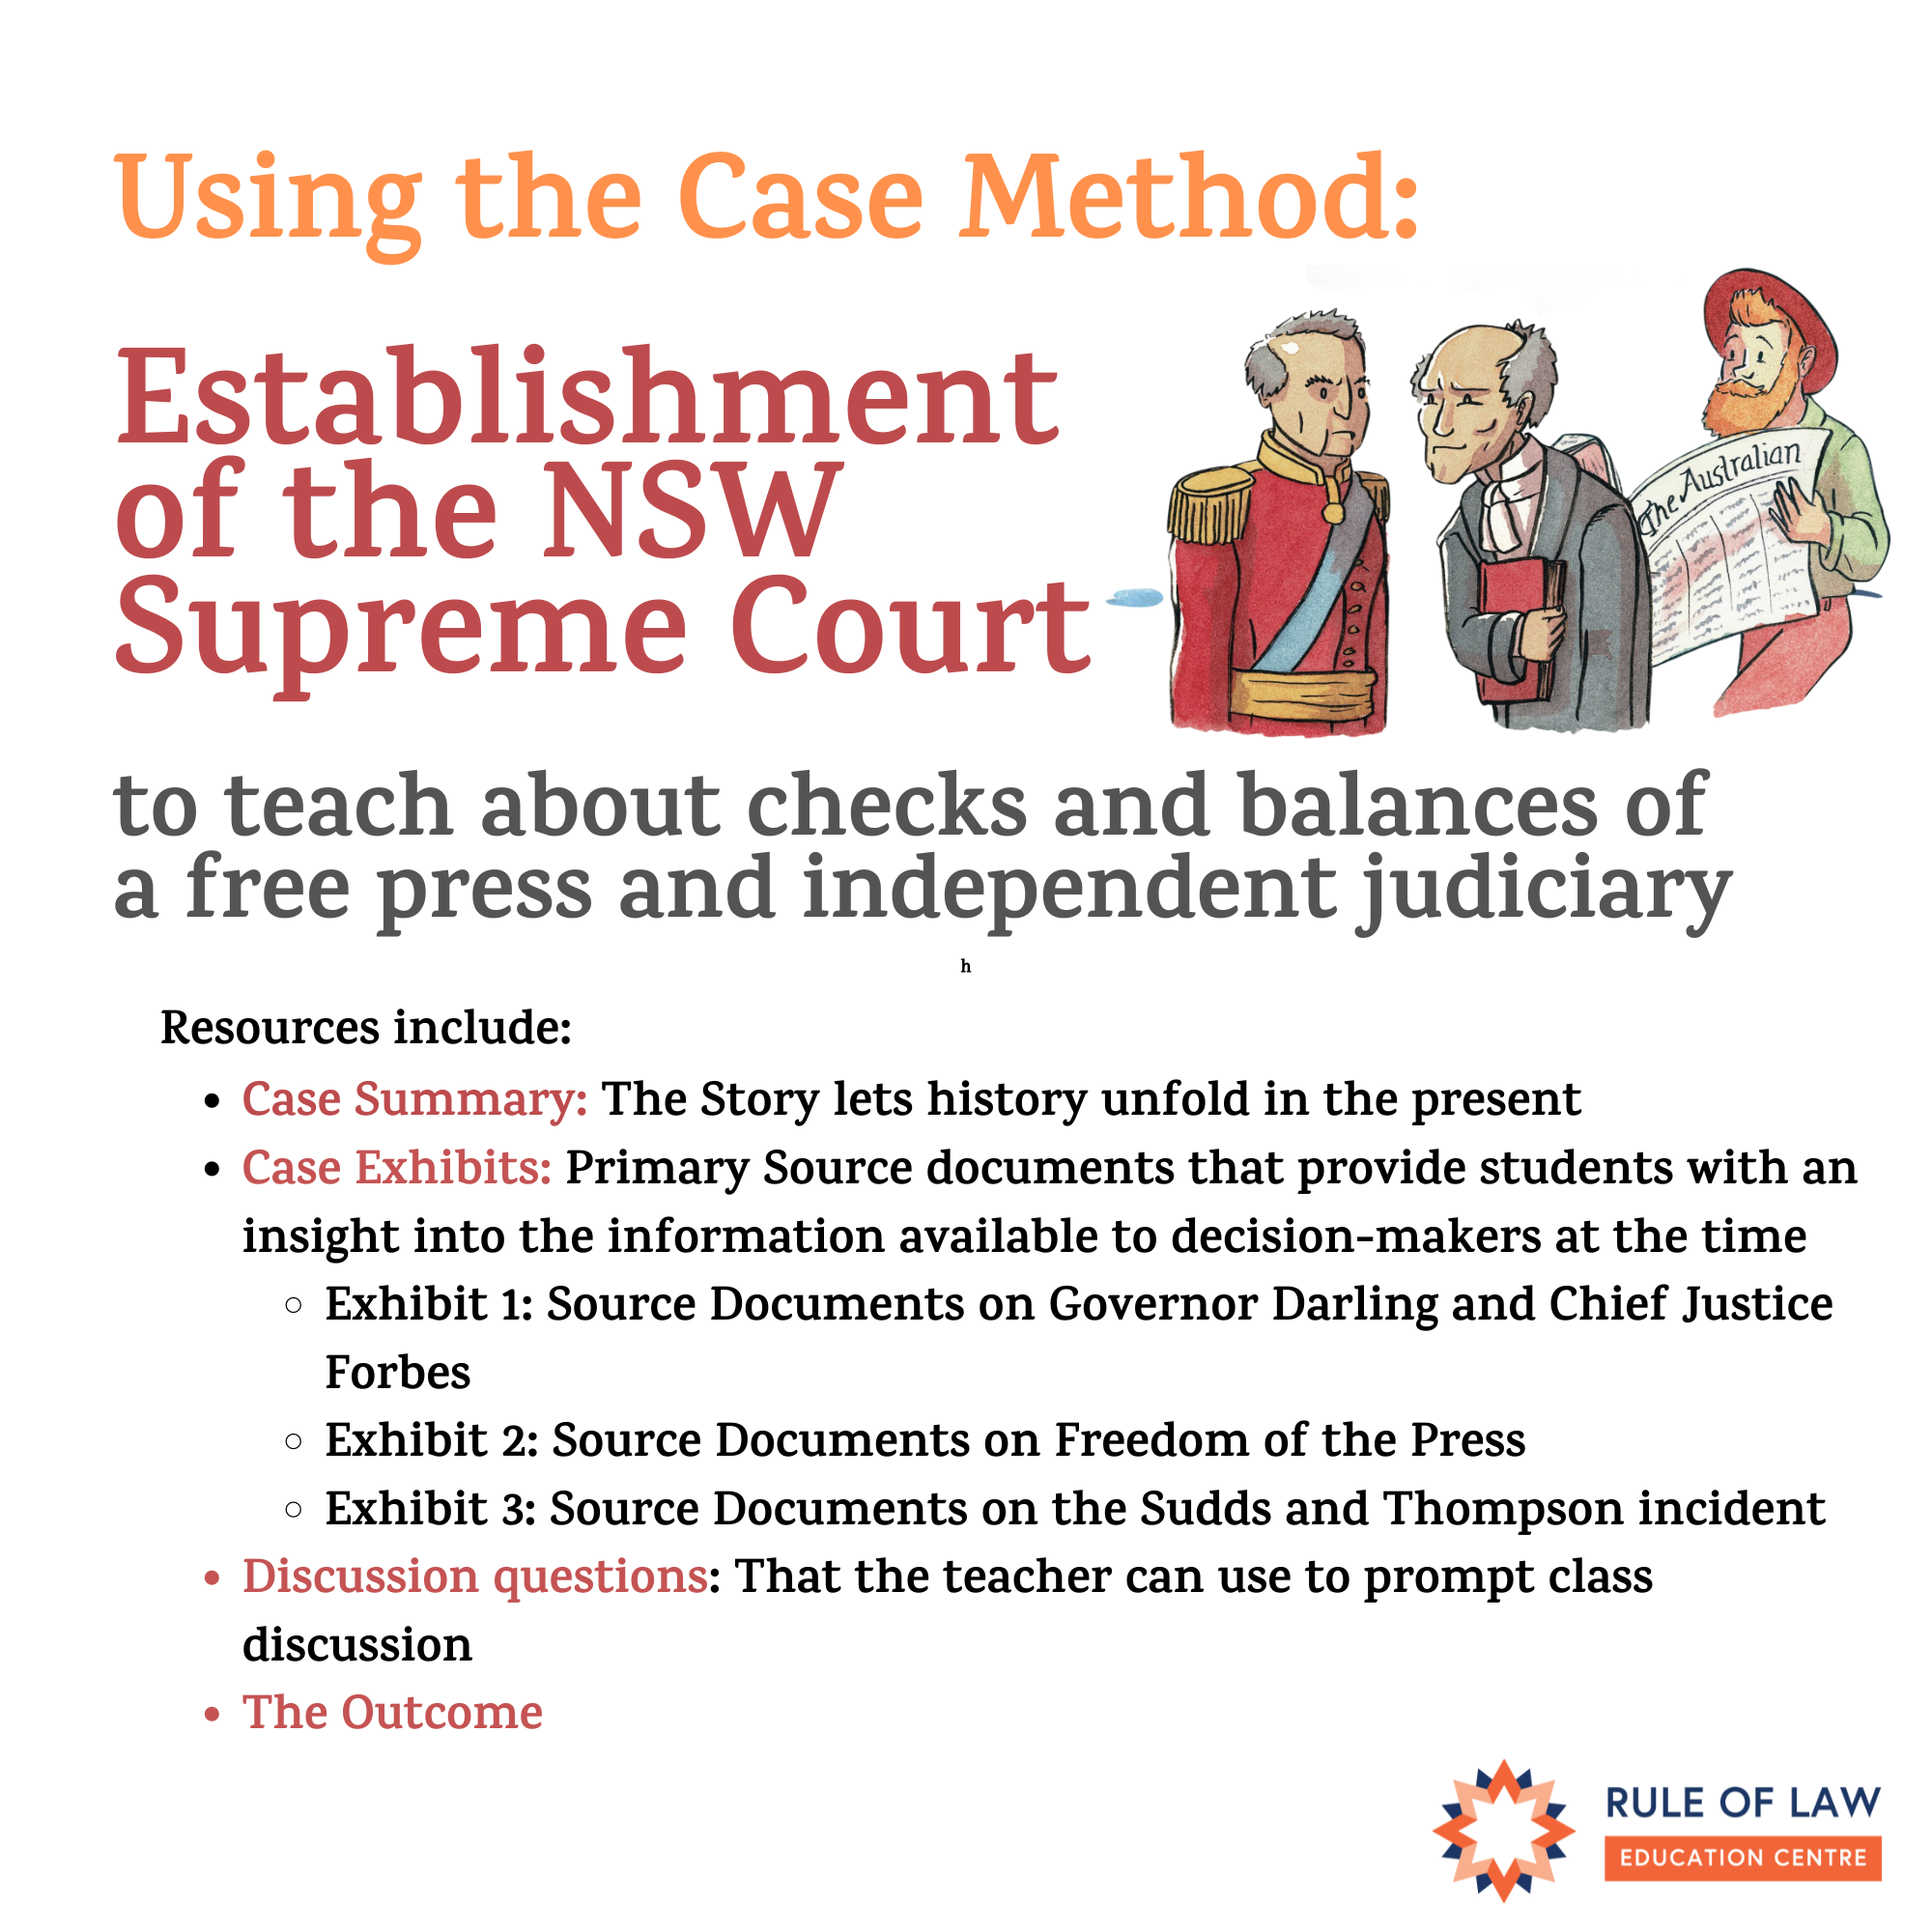 NSW Supreme Court, Free Press and Independent Judiciary